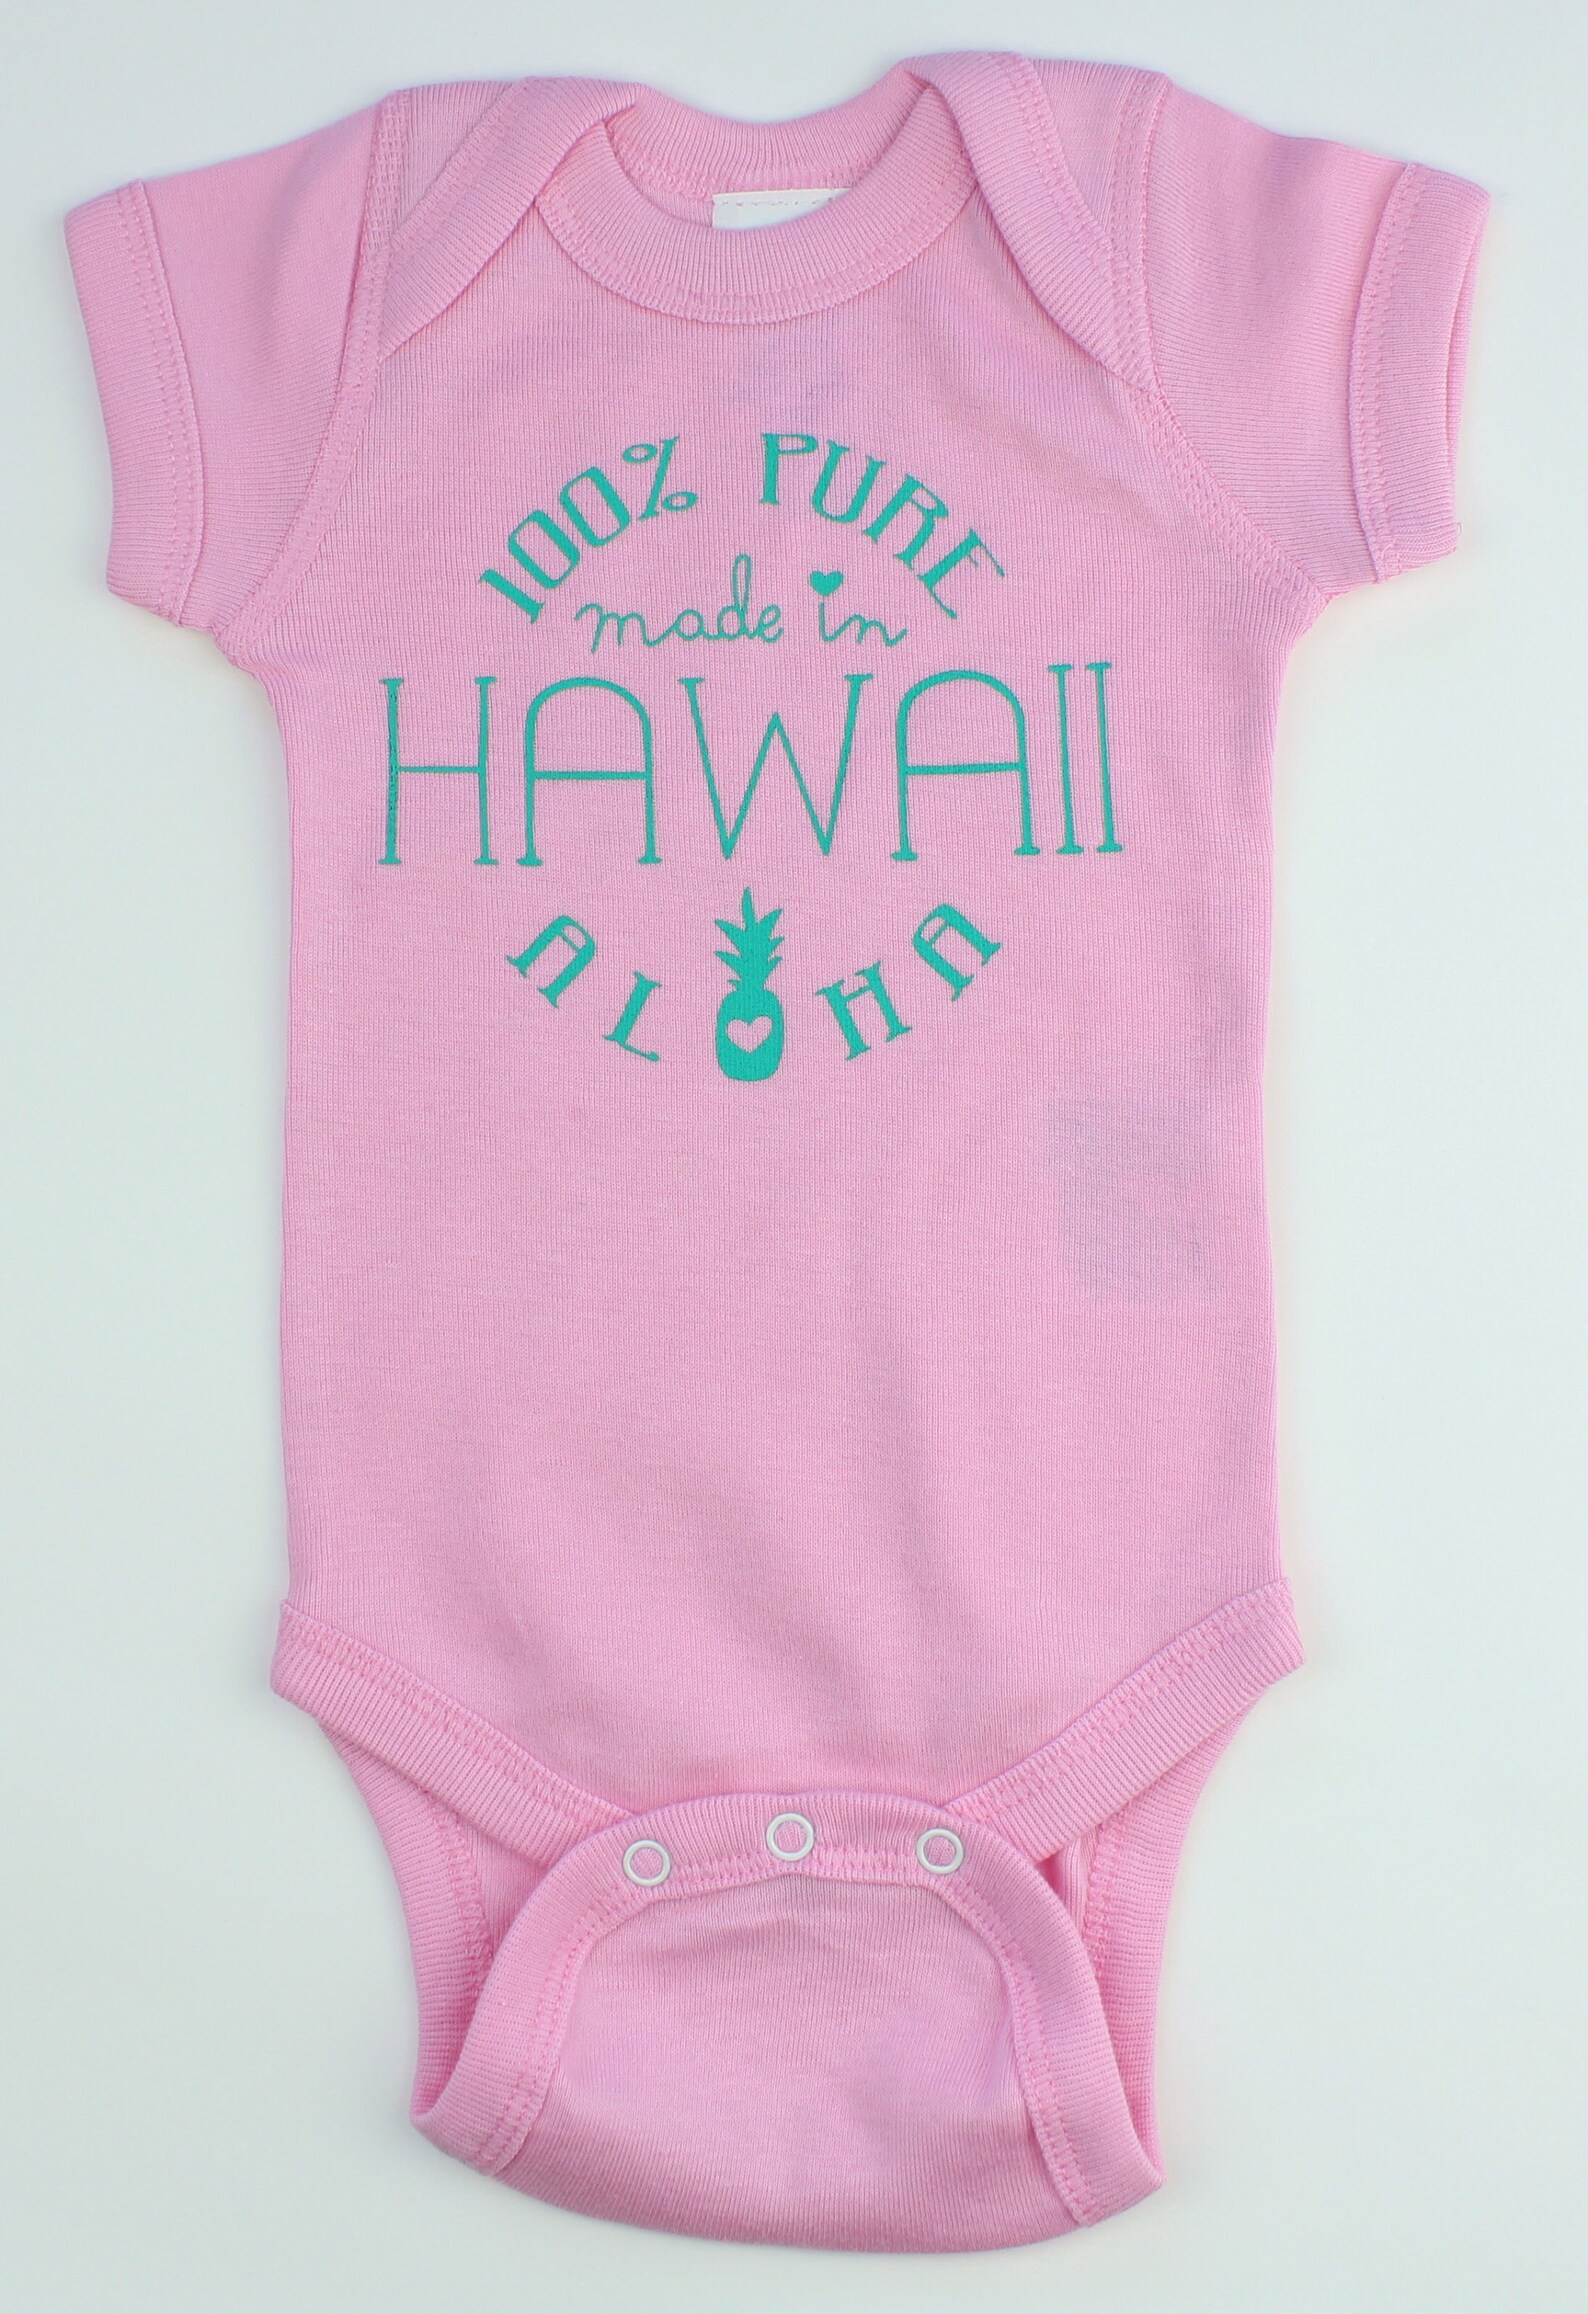 Made in Hawaii Outfit Gender Reveal Hawaiian Baby Gifts | Etsy